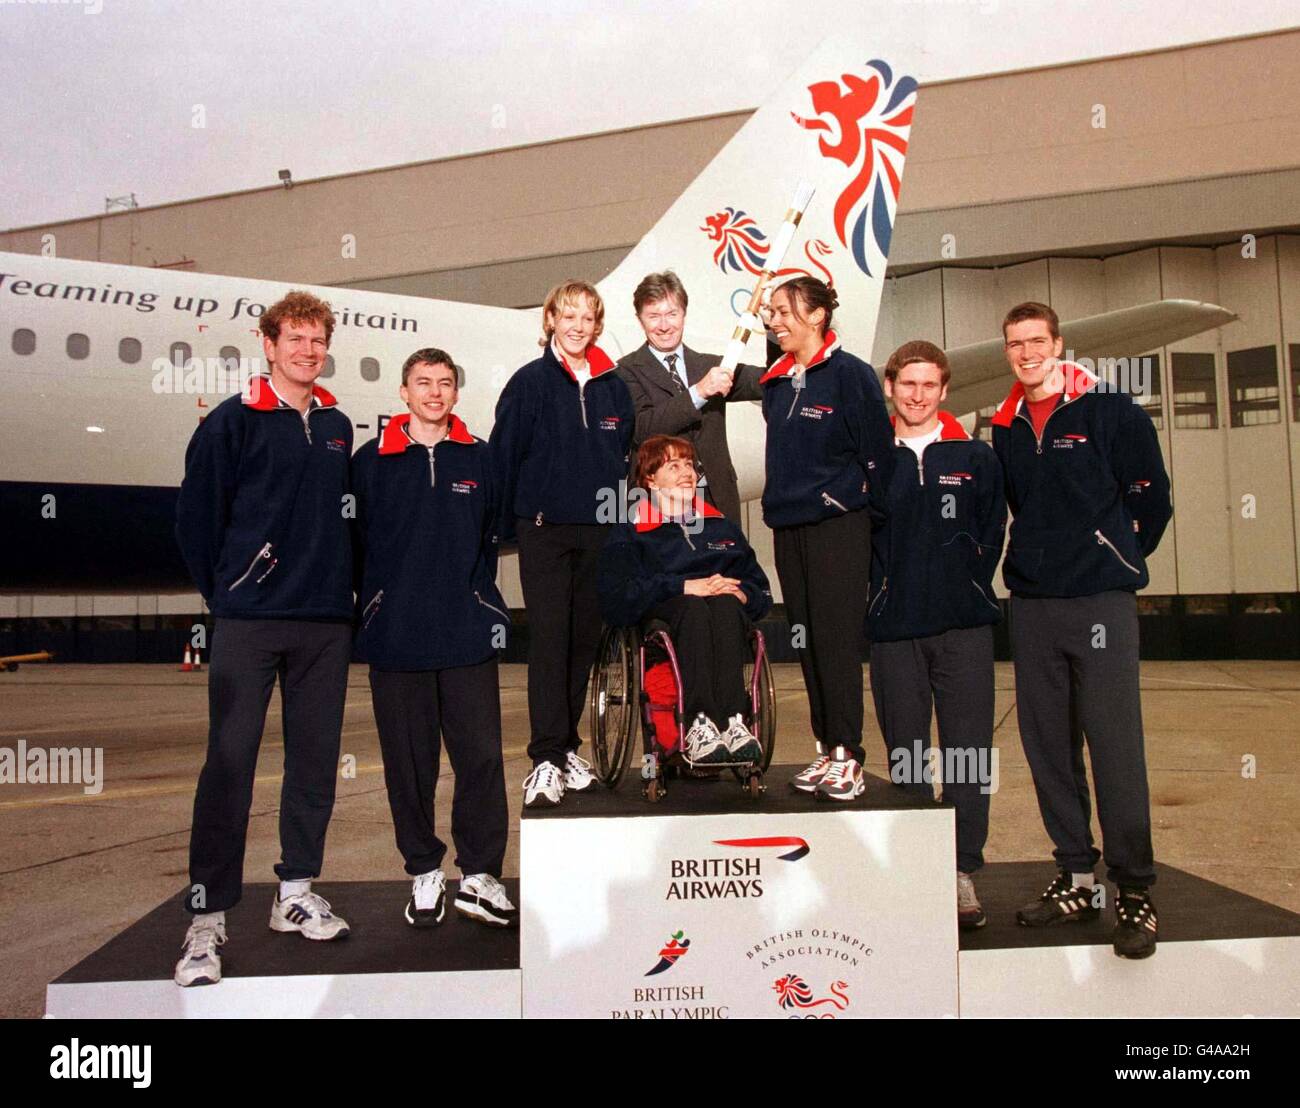 Bob Ayling, Chief Executive of British Airways, with British athletes (left-right) Greg Searle, Jonathan Edwards, Alison Curbishley, Paralympic gold medalist, Tanni Grey (wheelchair), Kelly Holmes, Gold Medalist Paralympic swimmer, Chris Holmes and Jonny Searle, at Heathrow Airport today (Weds) where BA unveiled their newly designed aircraft dedicated to the Olympics. The UK's premier international airway also announced its plans to provide free flights for all competitors and officials as part of their sponsorship deal with the British Olympic Association and the British Paralympic Stock Photo